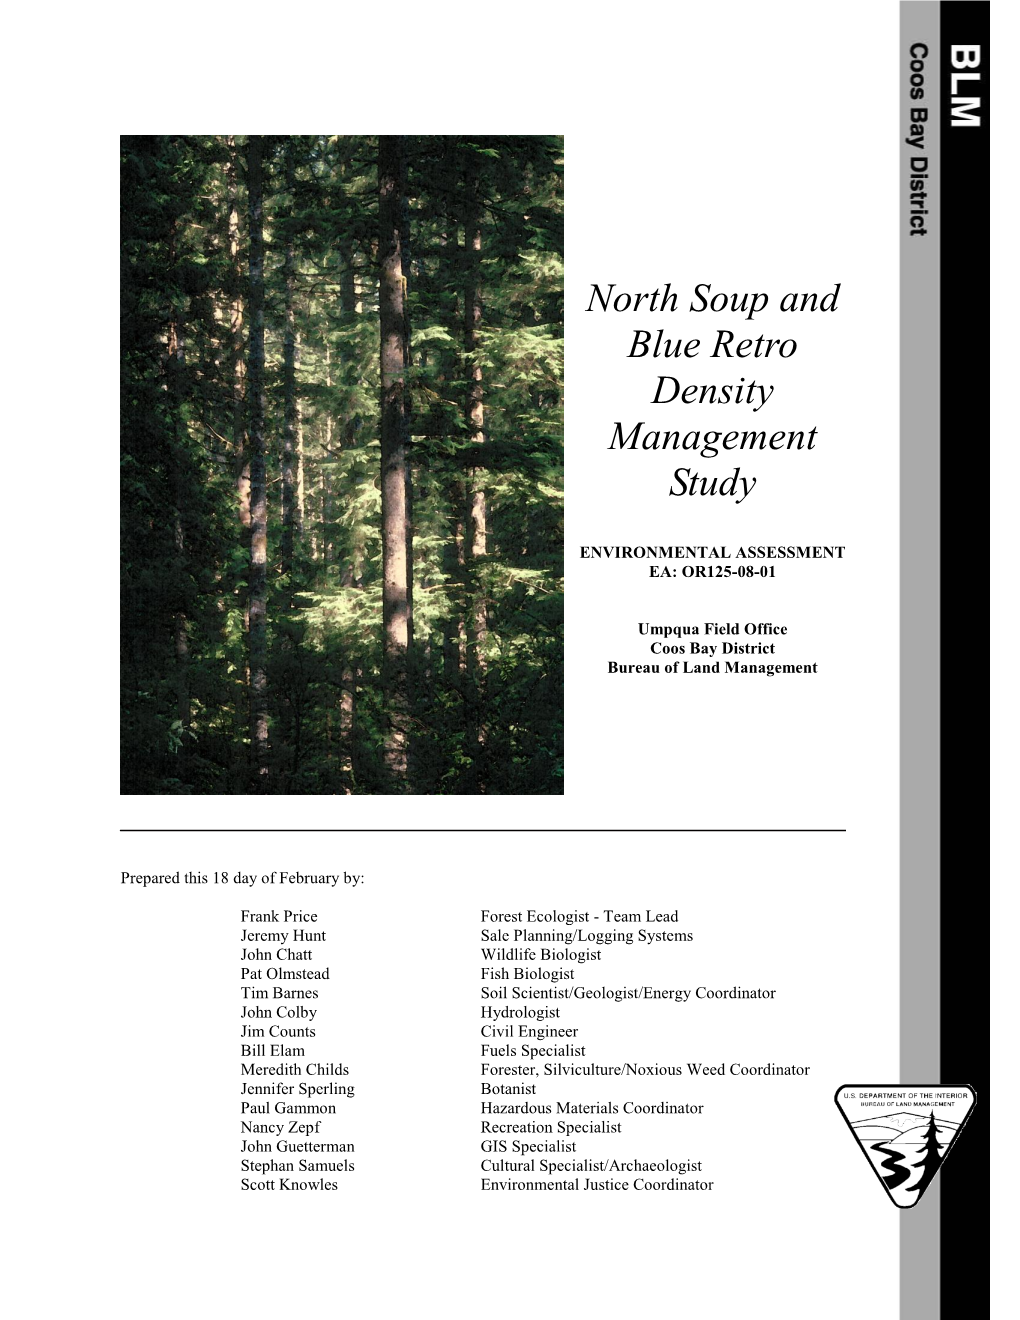 North Fork Soup Creek and Blue Retro Density Management Study